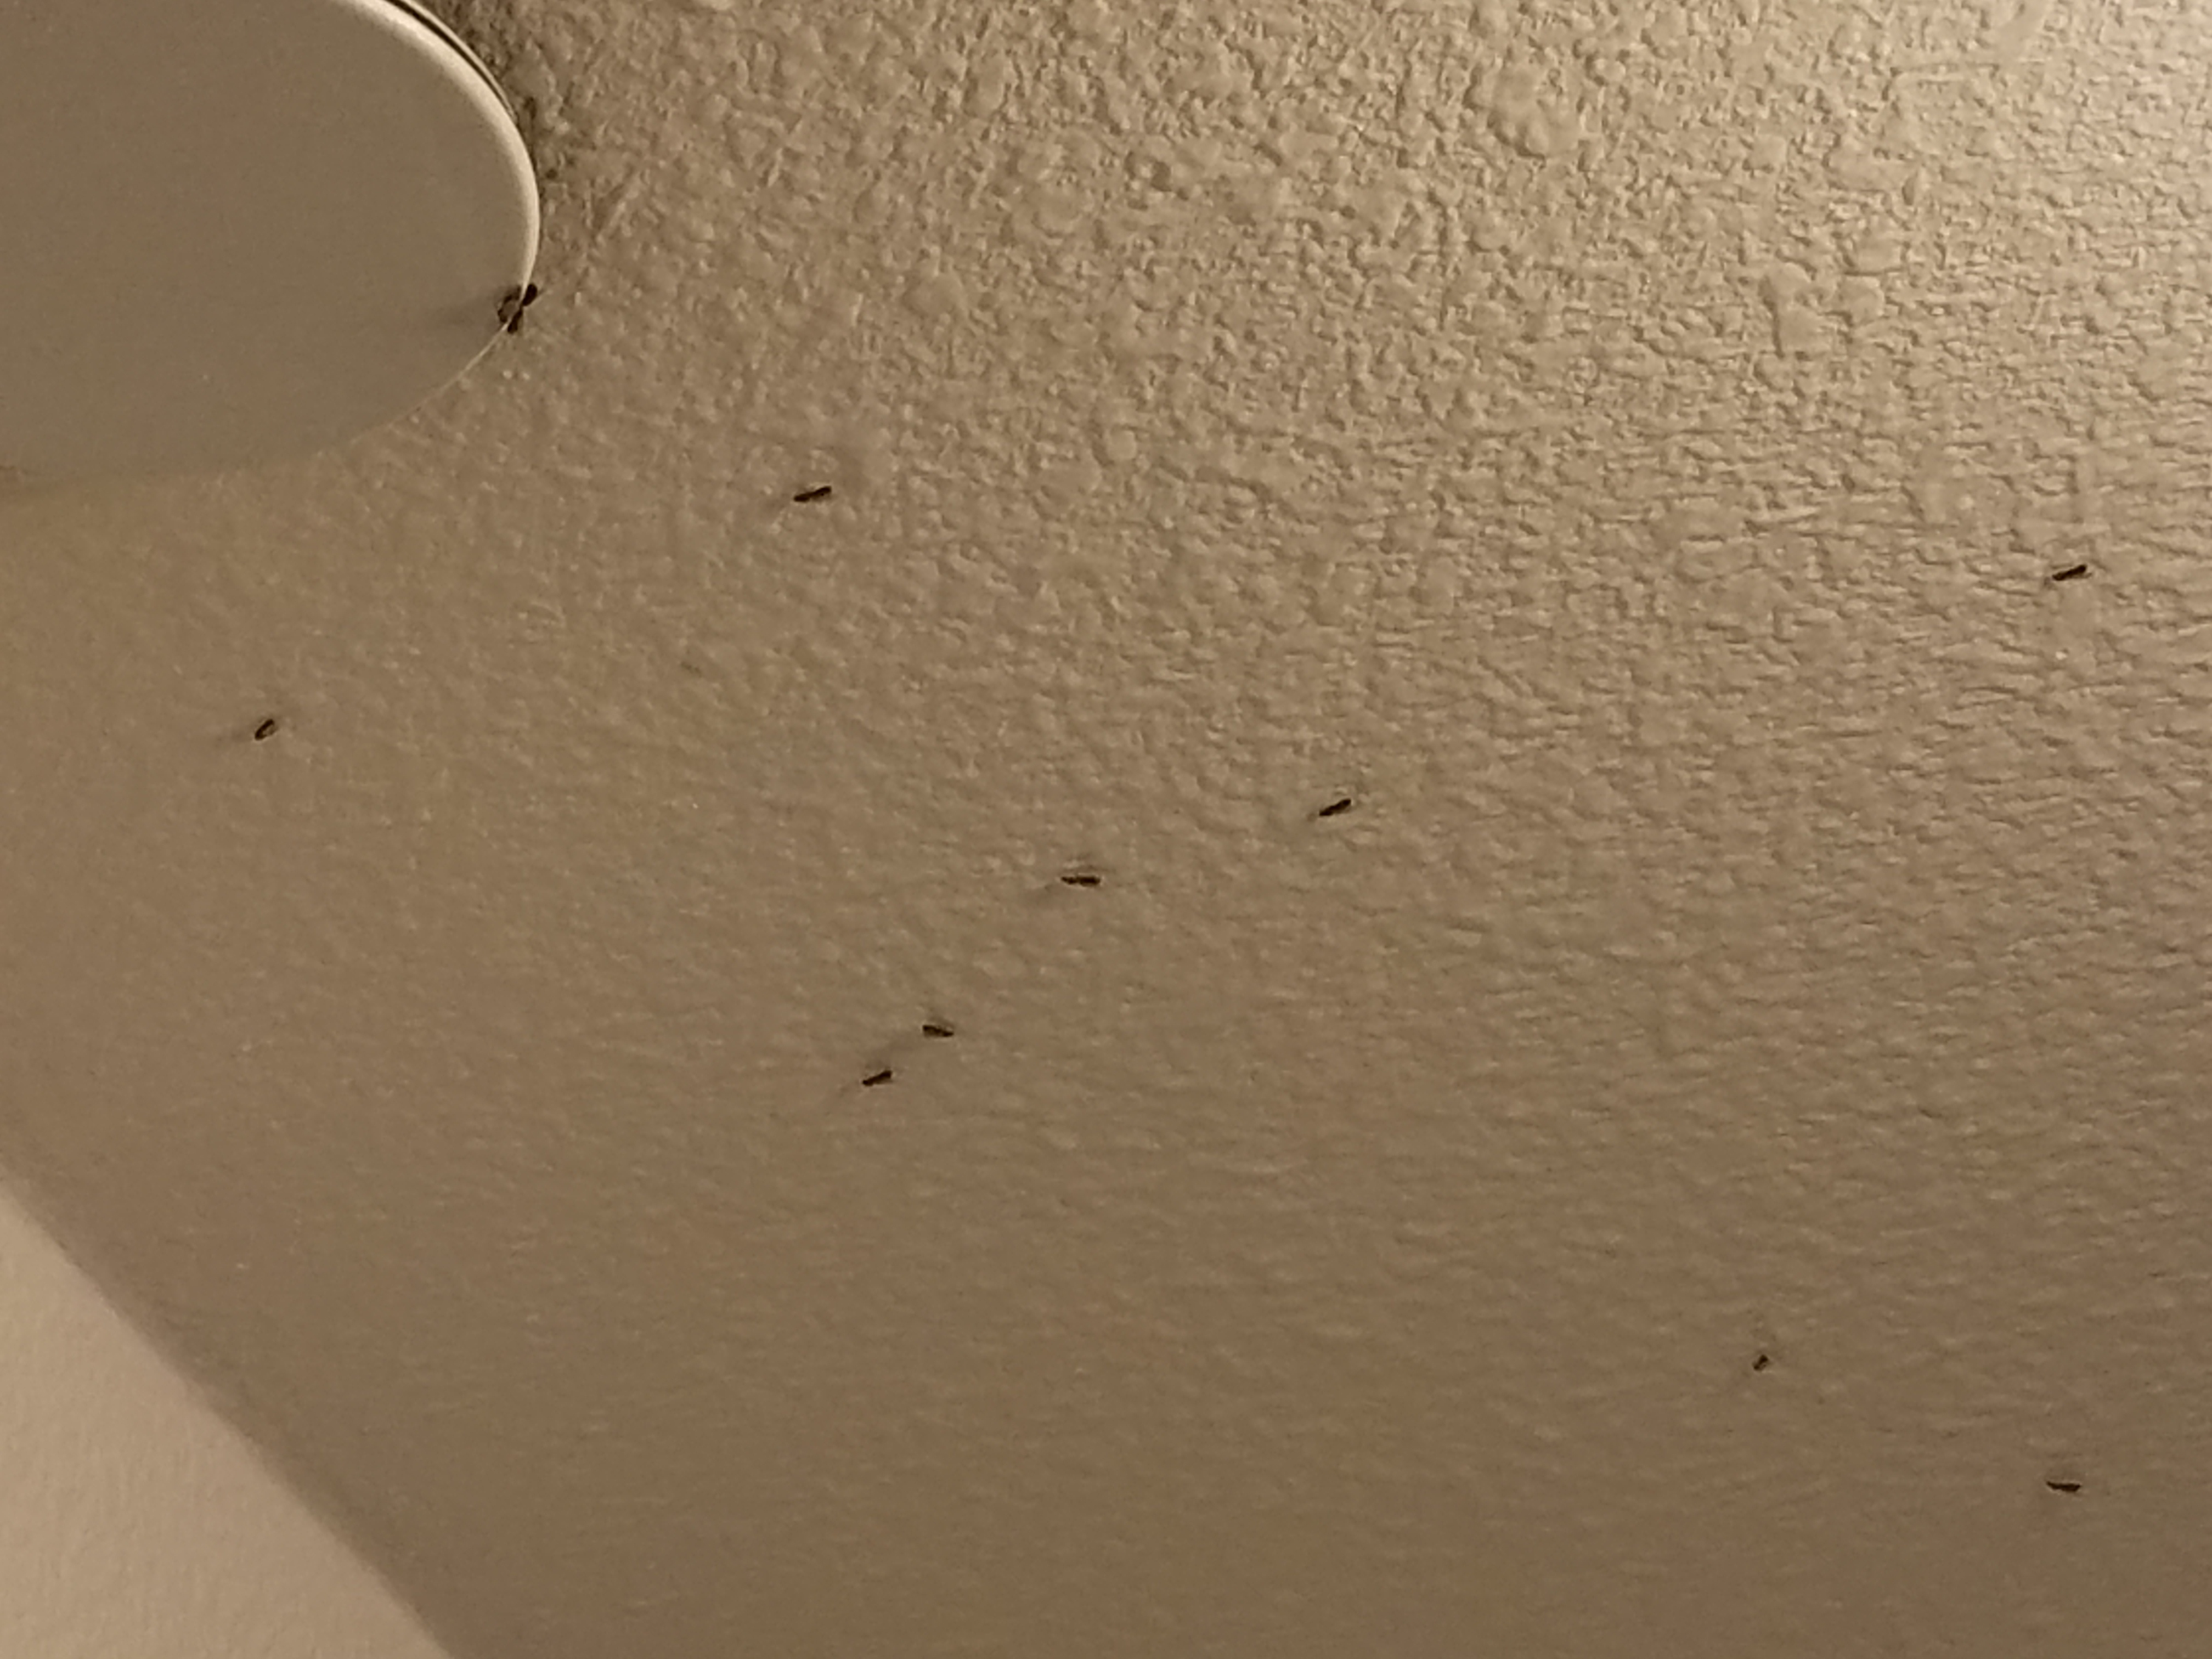 Tiny Black Bugs In My Living Room